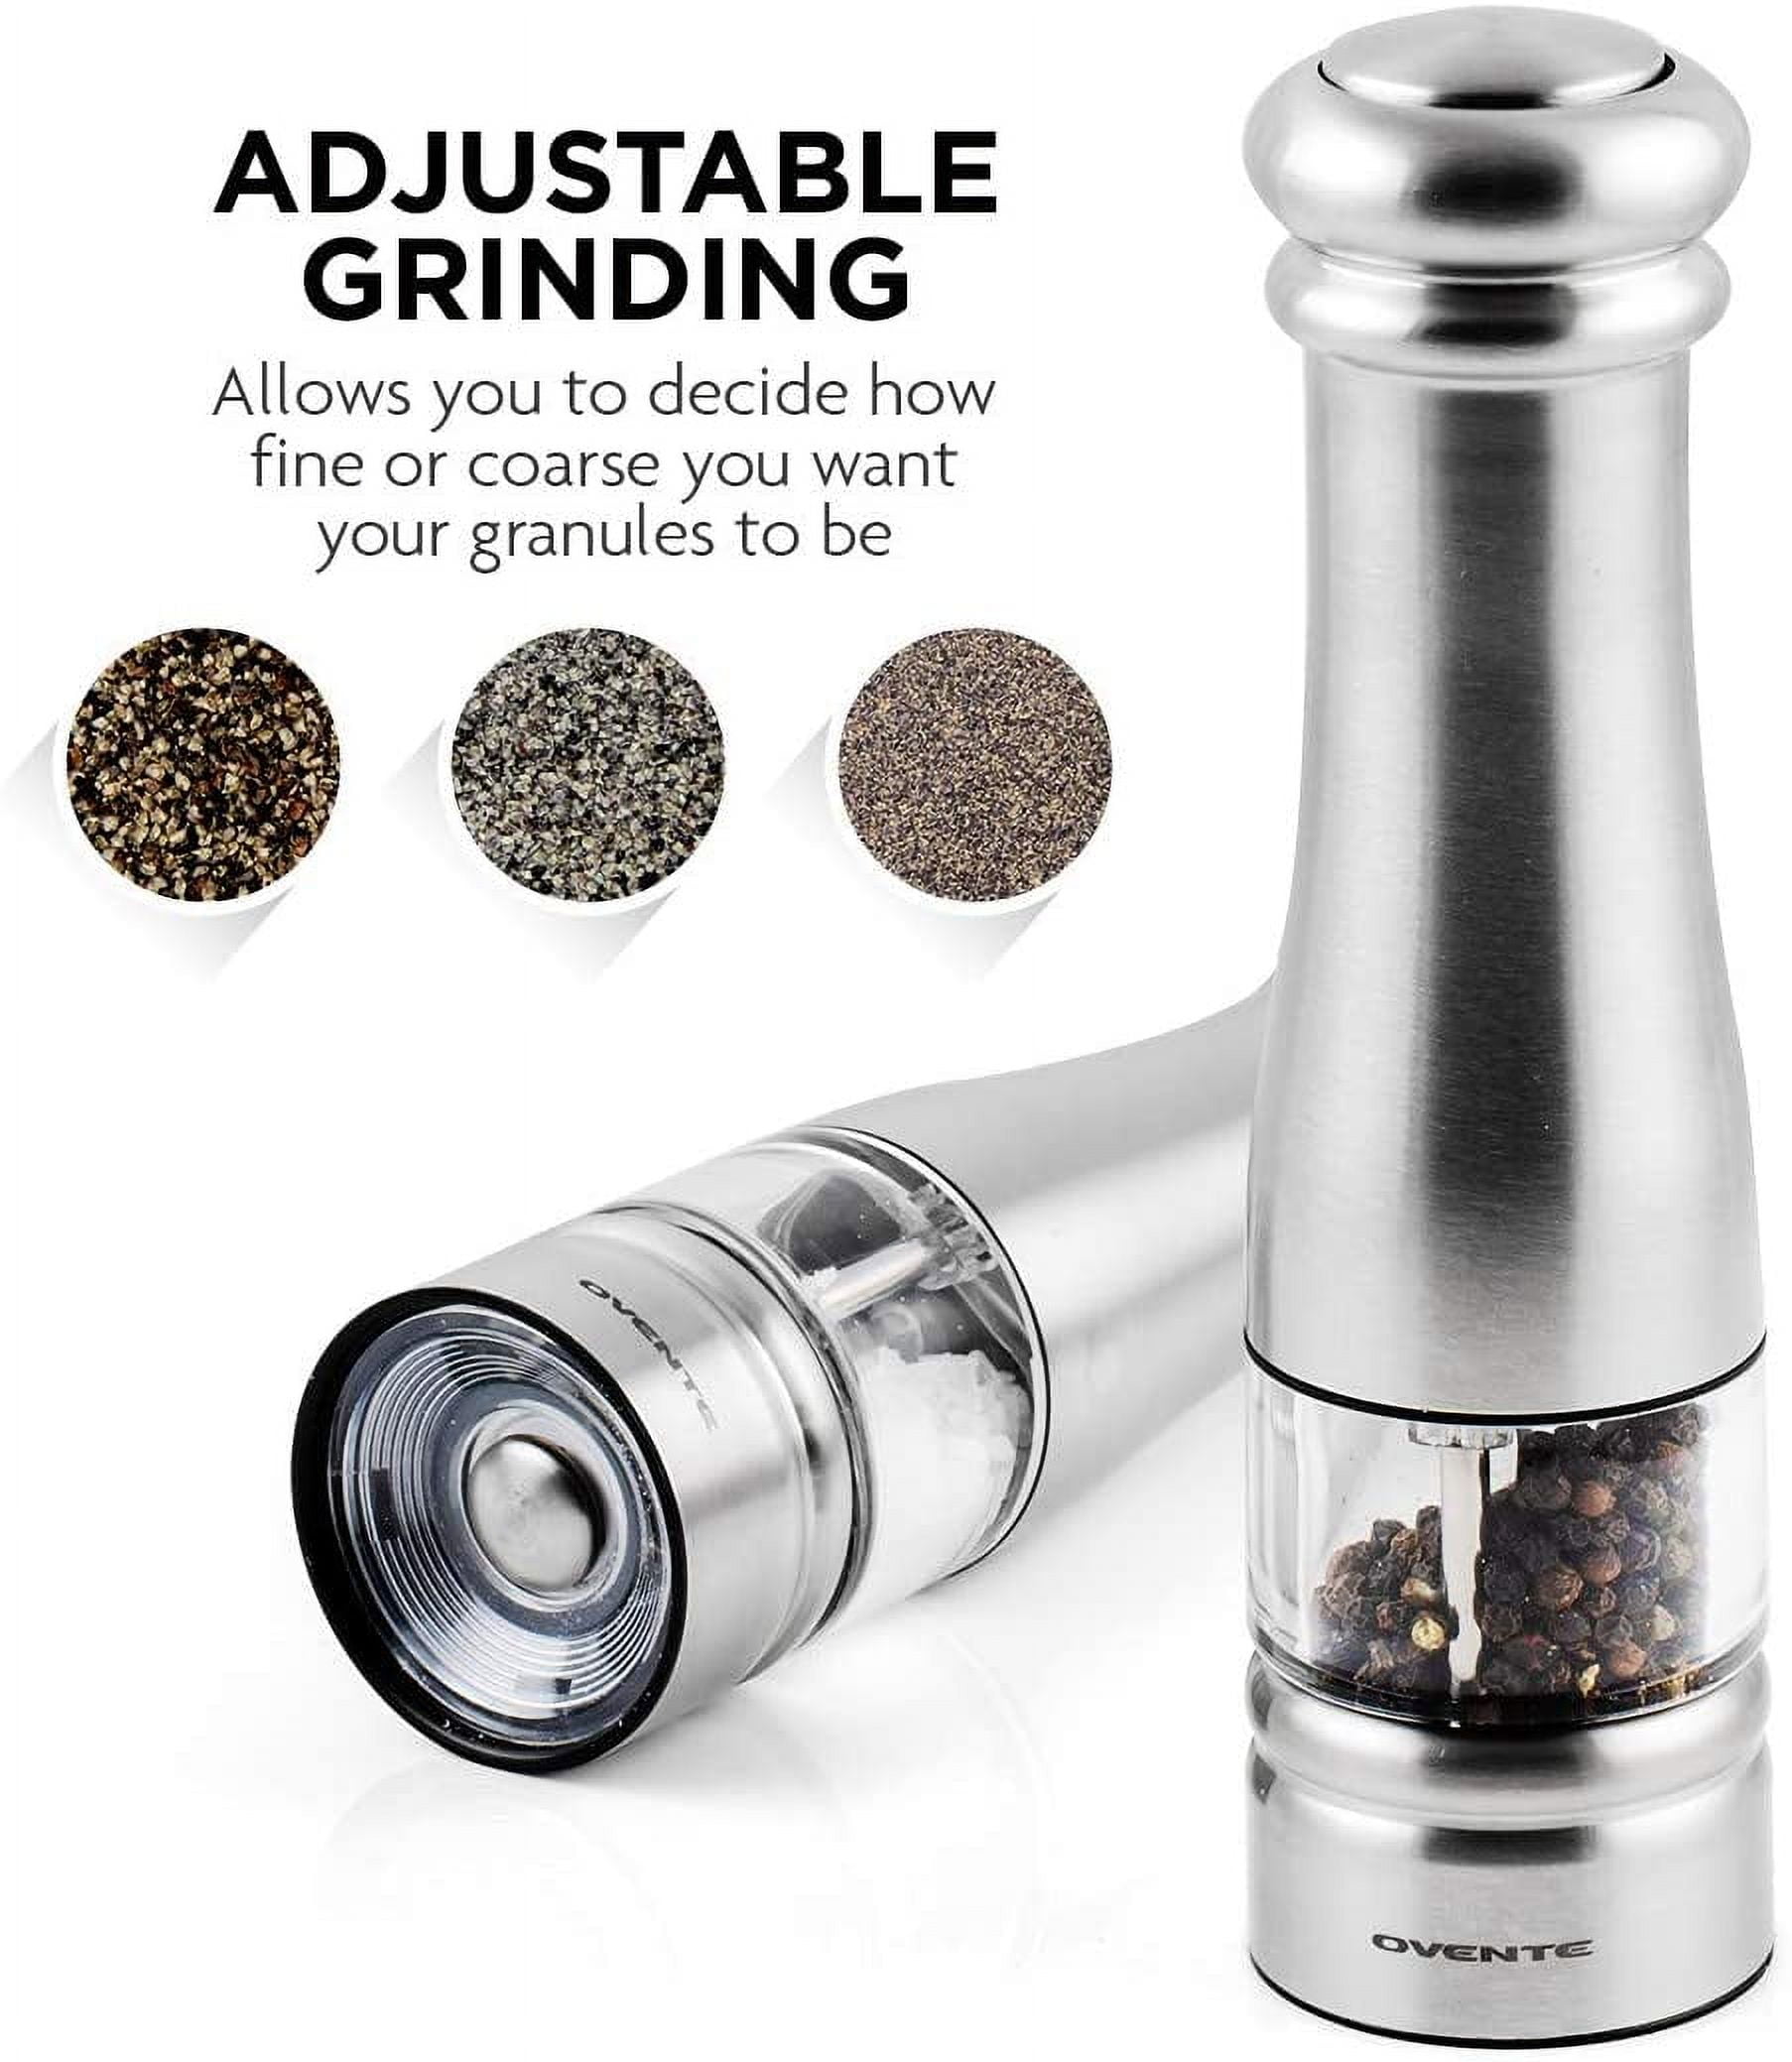 OVENTE 2 in 1 Stainless Steel Sea Salt and Pepper Grinder with